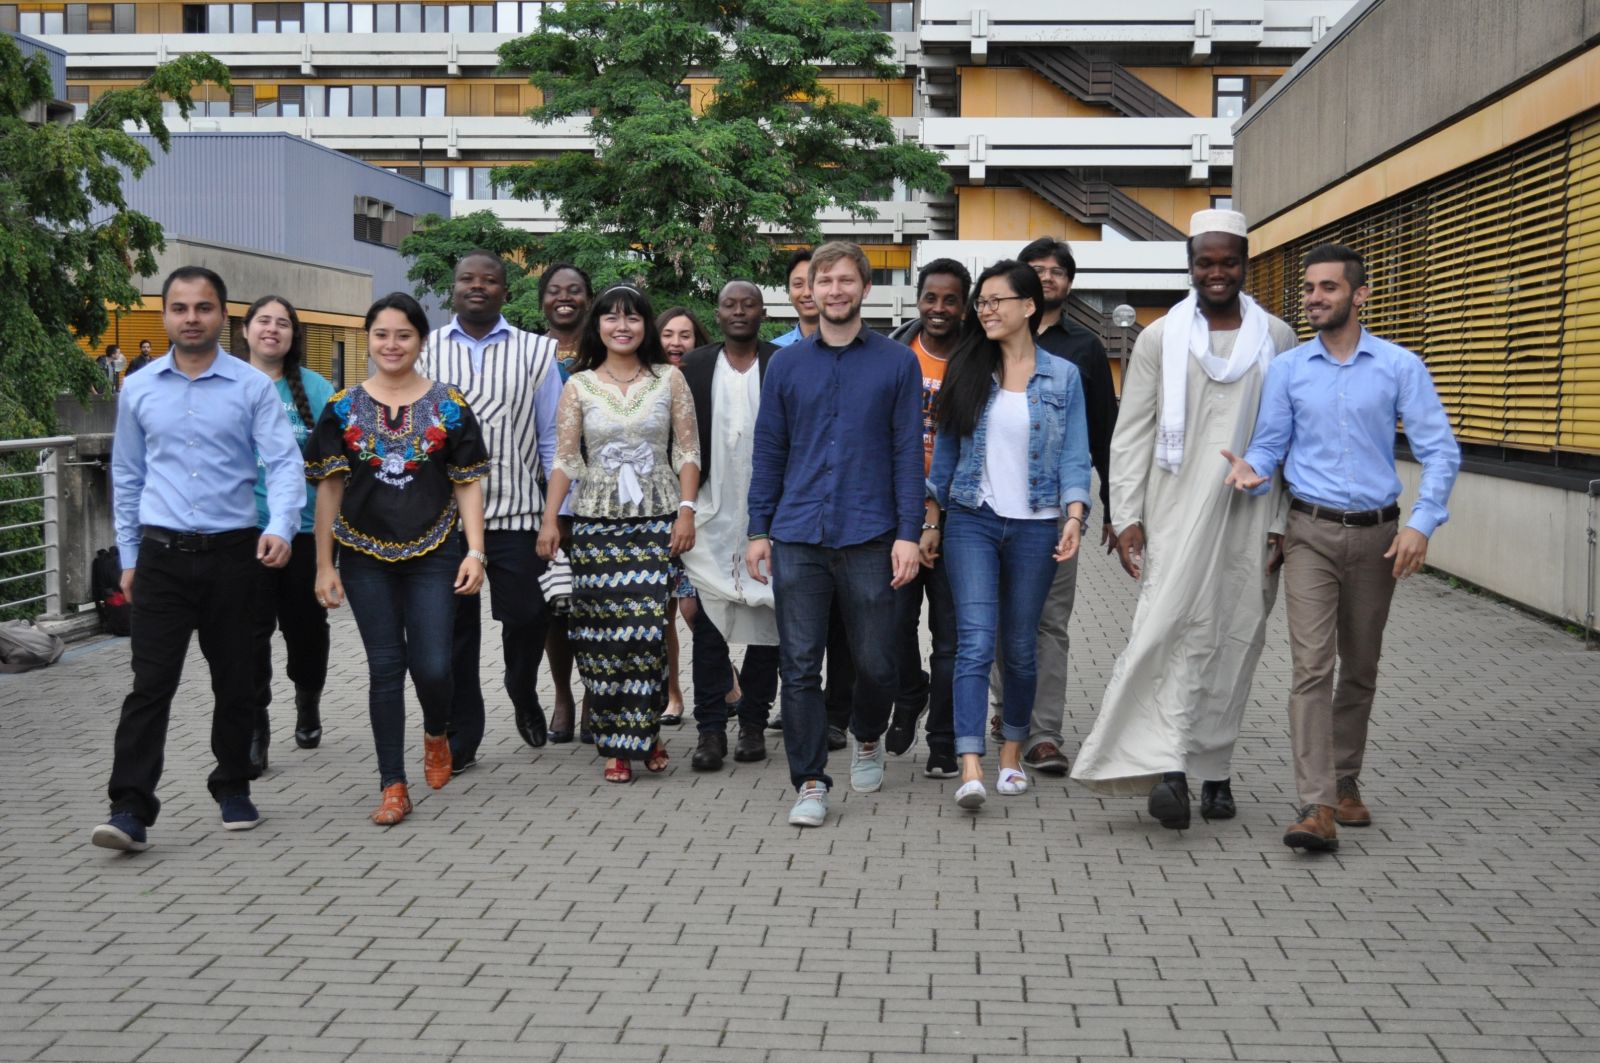 Students from around the world study in Cologne.